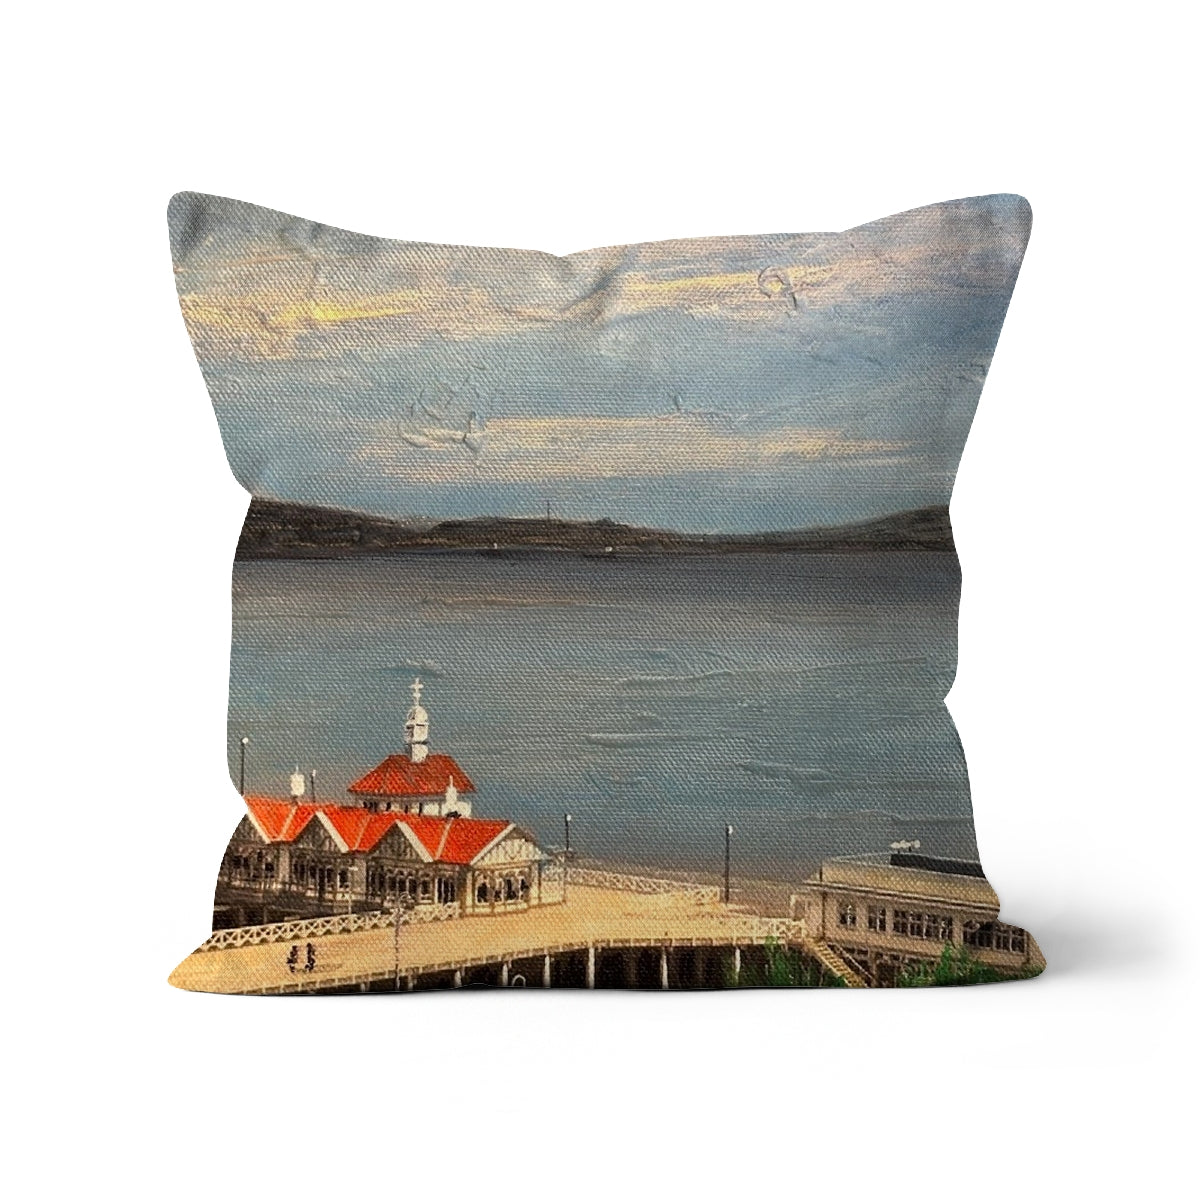 Looking From Dunoon Art Gifts Cushion-Cushions-River Clyde Art Gallery-Linen-12"x12"-Paintings, Prints, Homeware, Art Gifts From Scotland By Scottish Artist Kevin Hunter